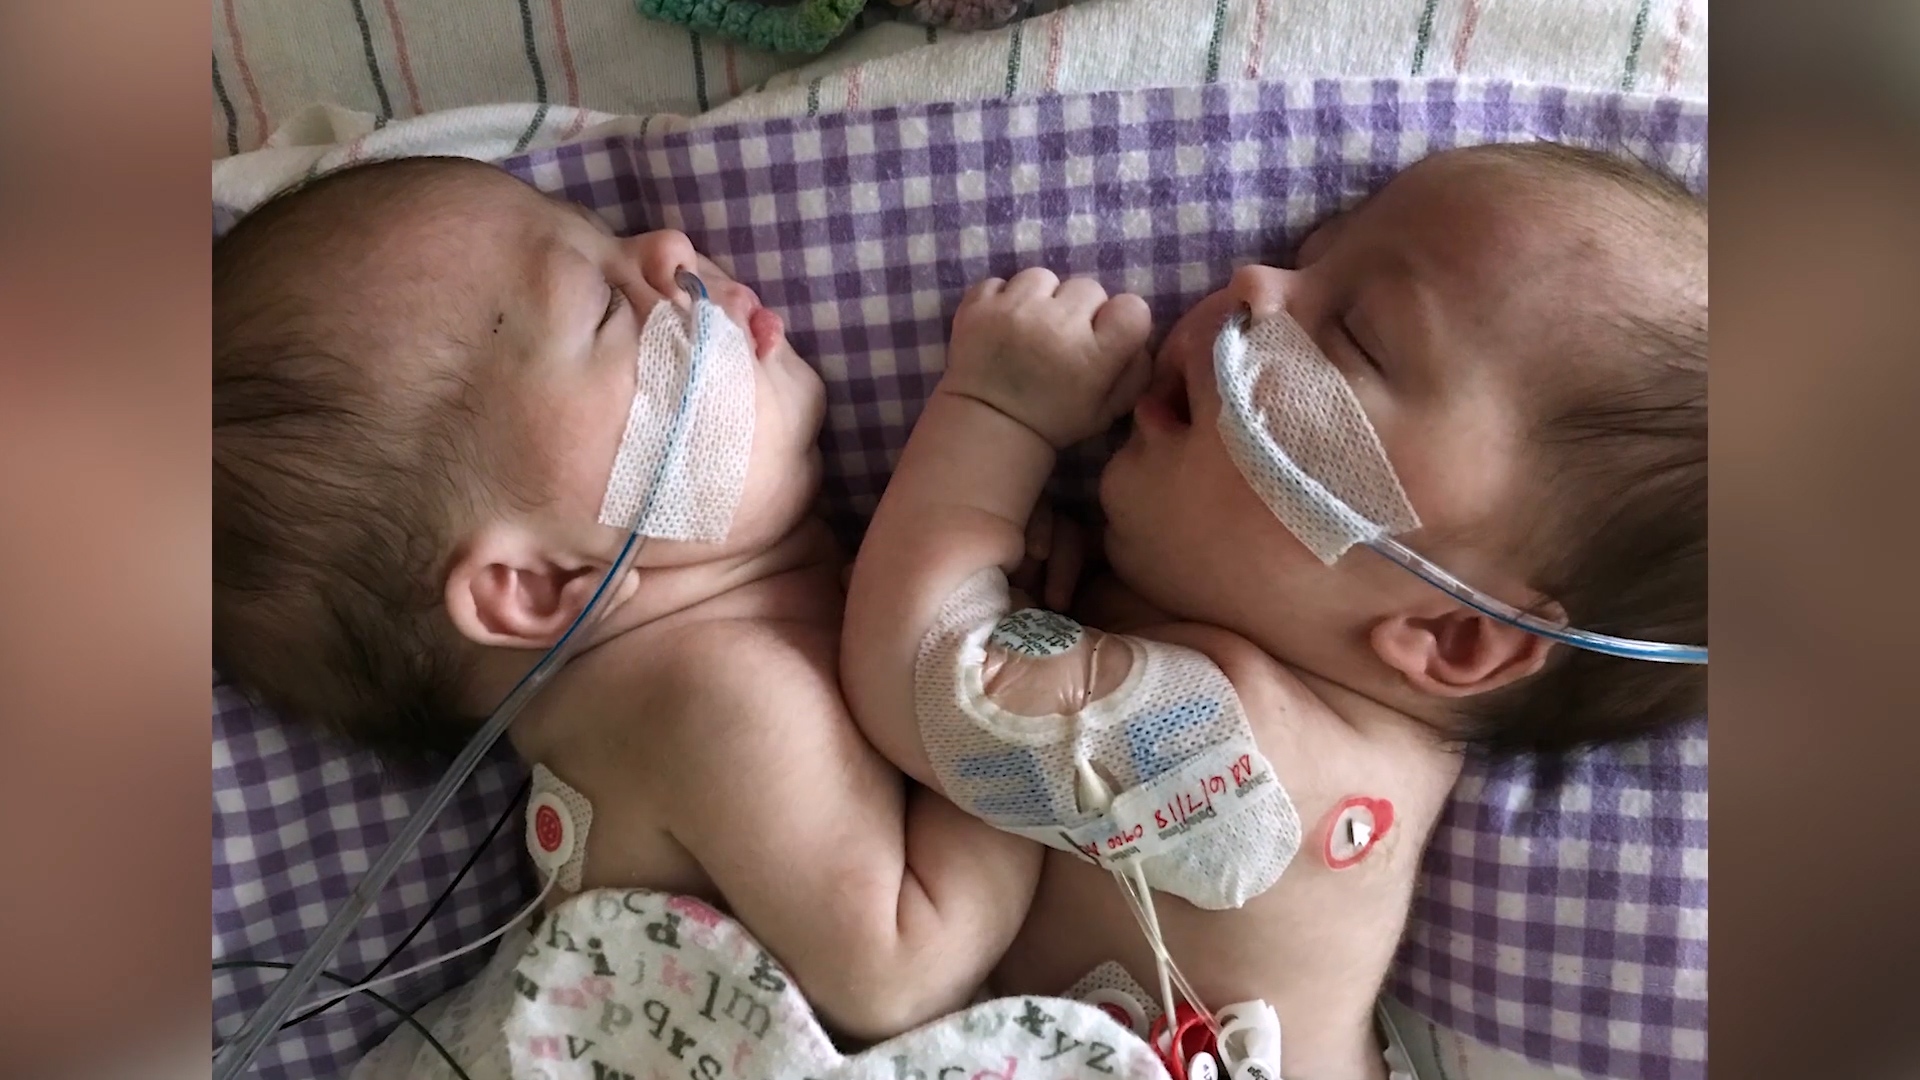 Conjoined Twins Jesi And Remi Pitre Are Finally Going Home To Apopka Fla In Separate Car Seats The Washington Post